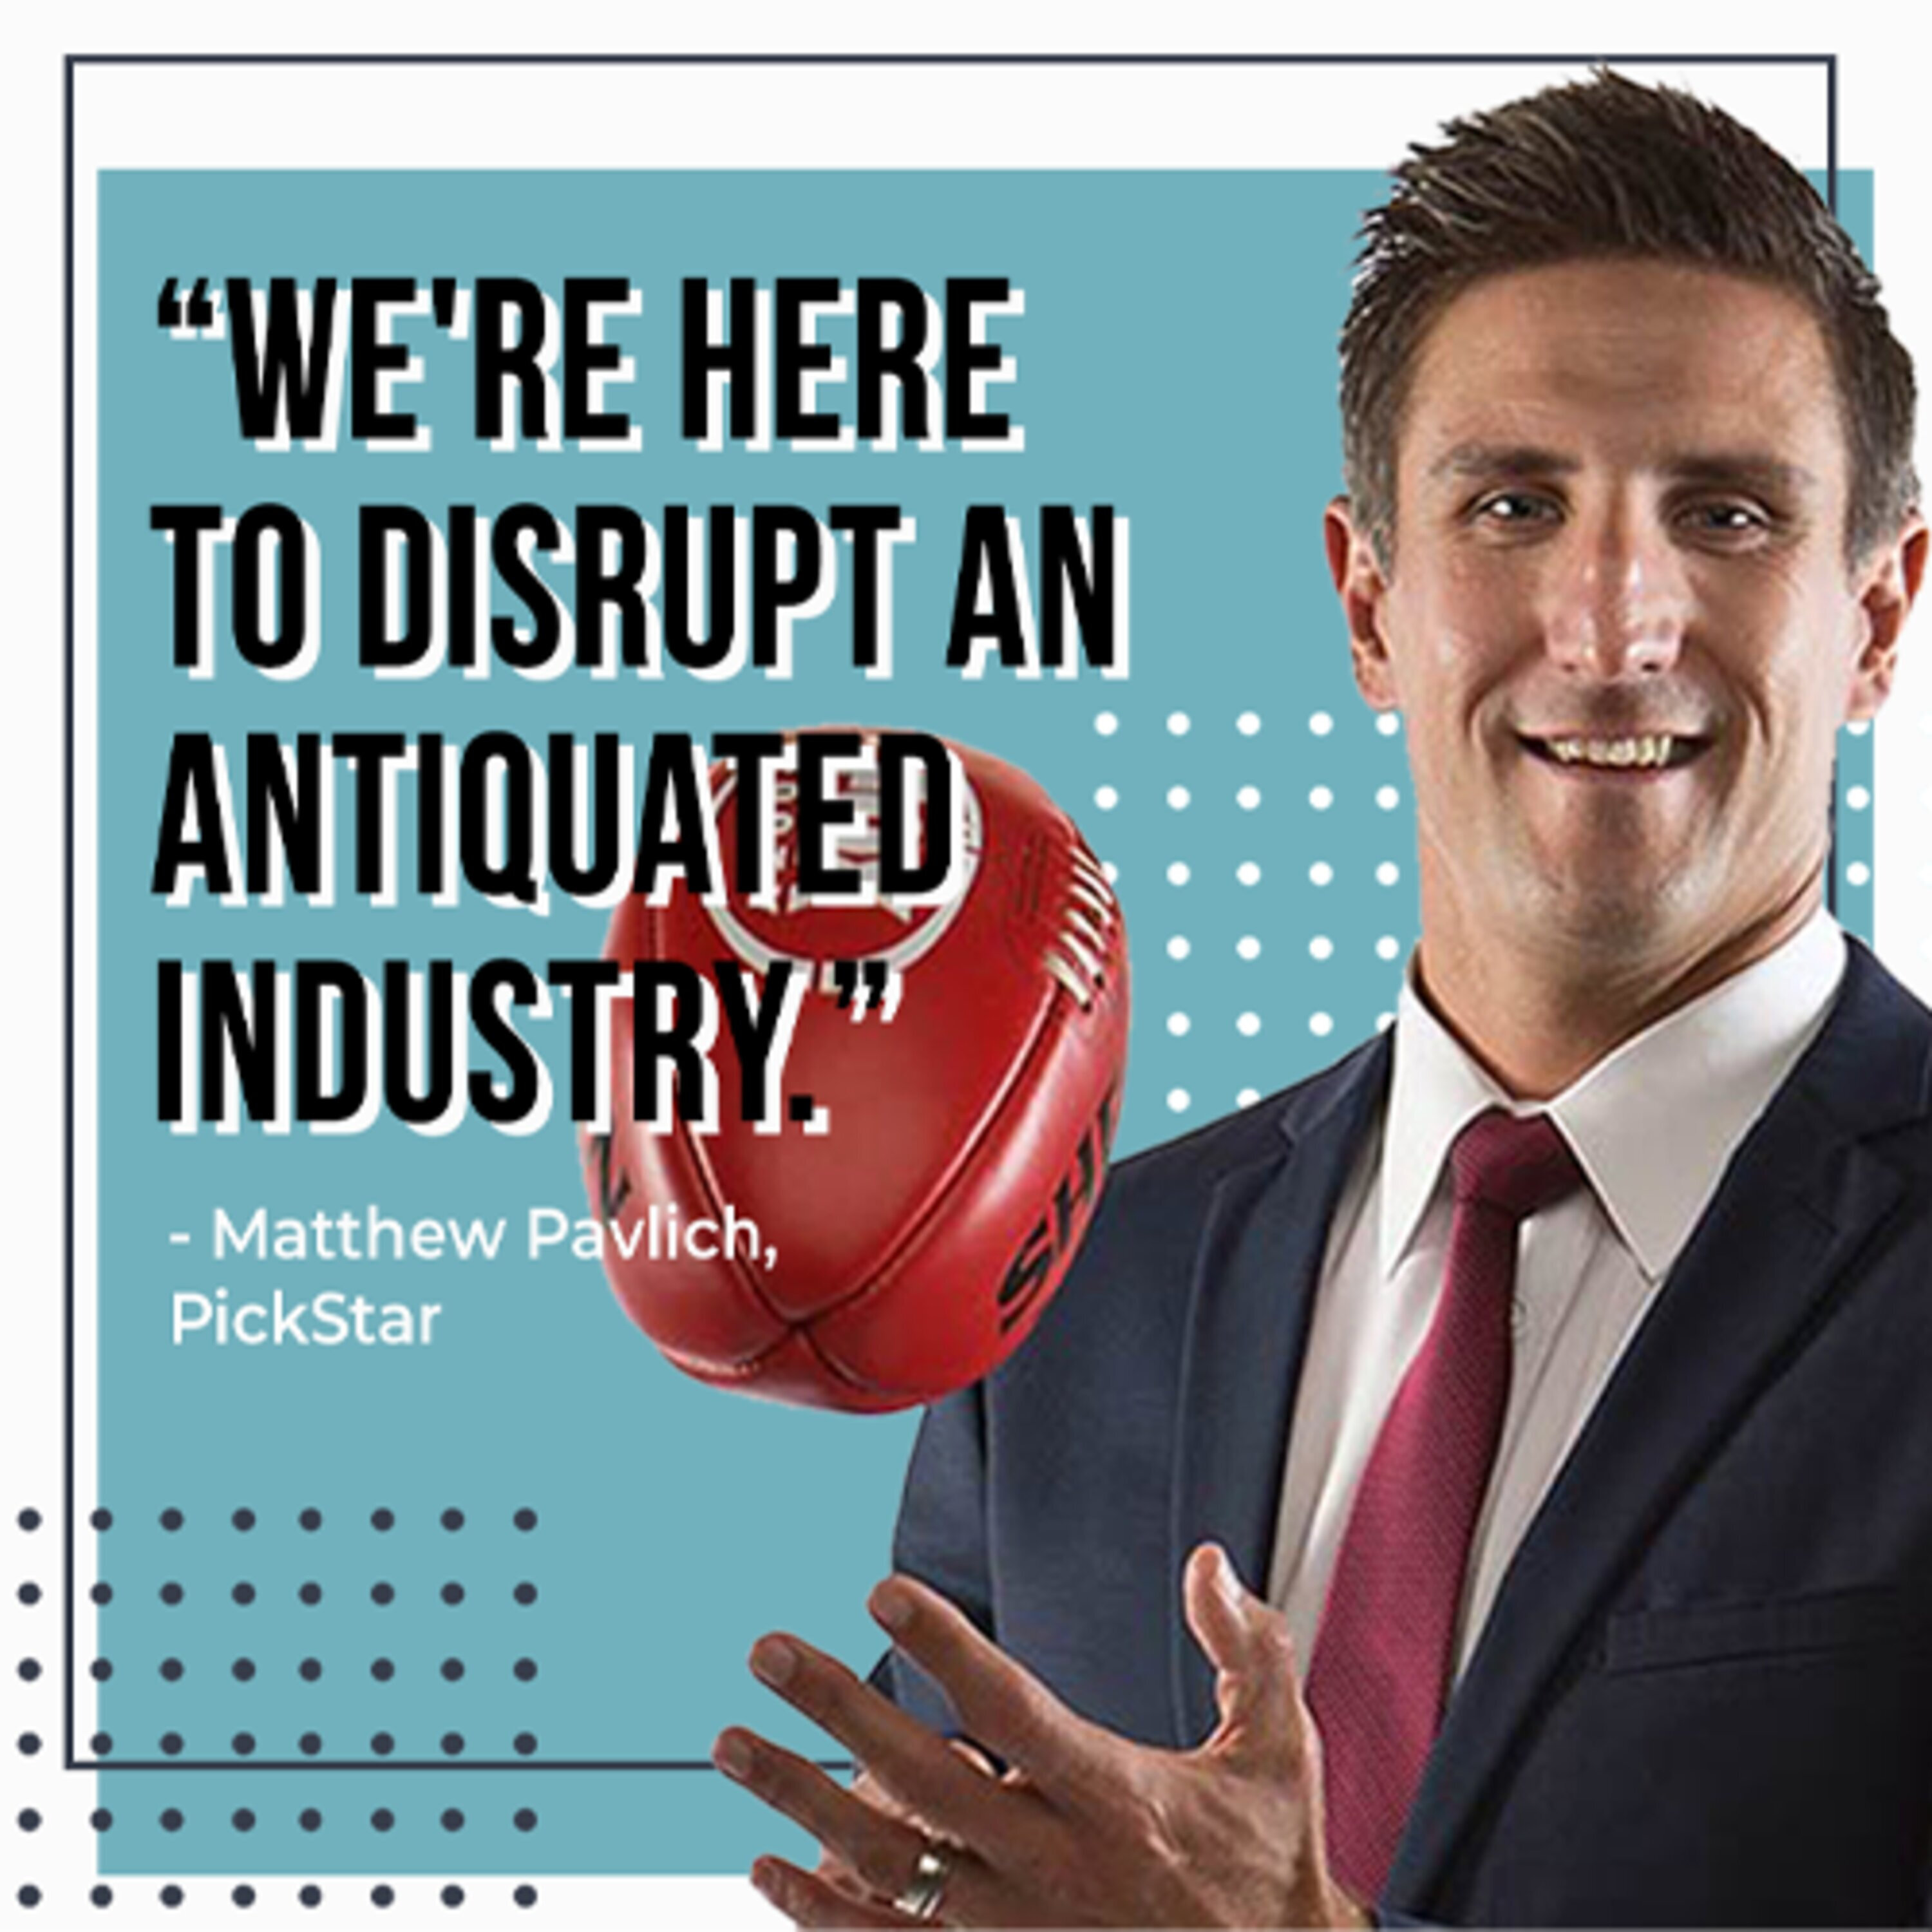 Sporting legend turned entrepreneur Matthew Pavlich is disrupting a very antiquated industry | #449